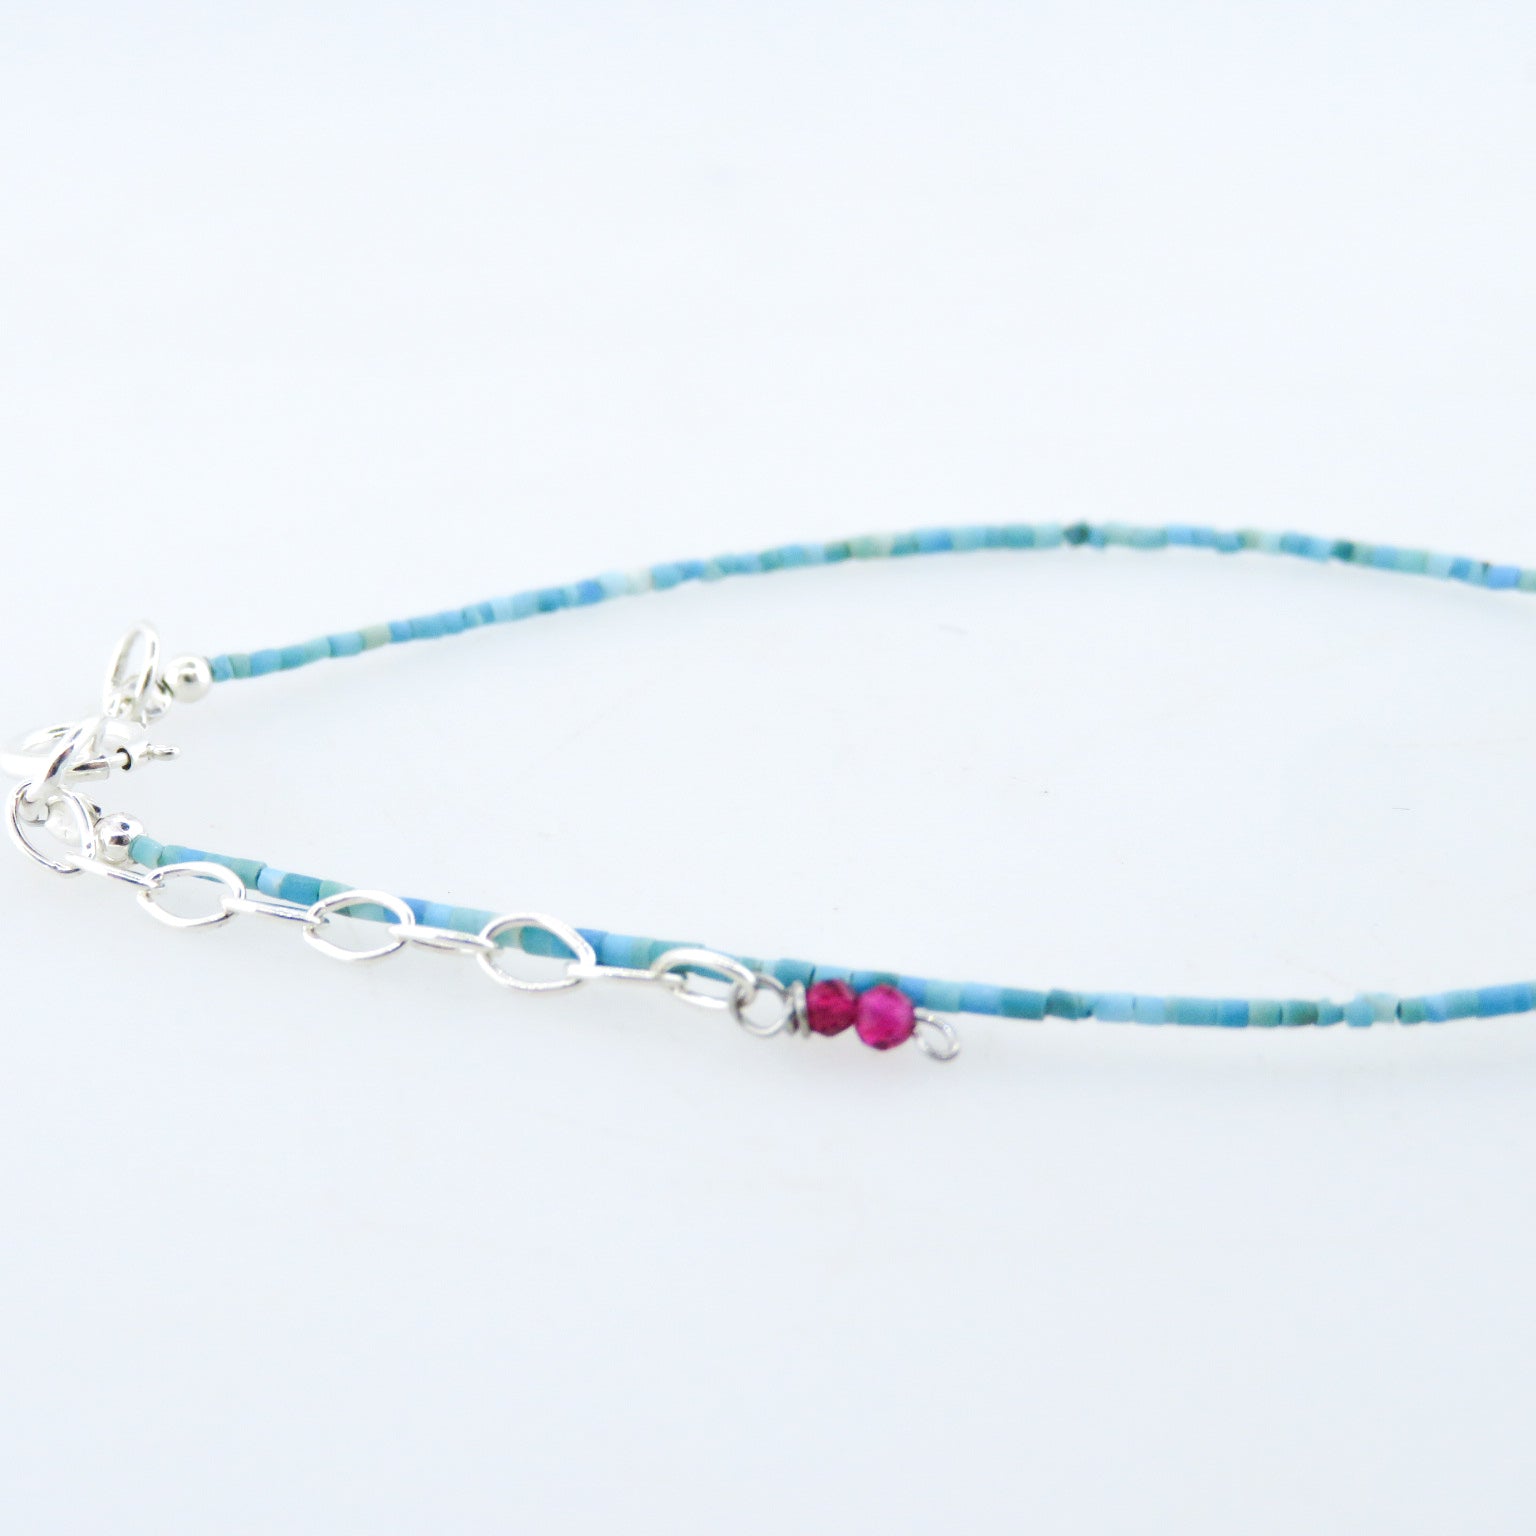 Turquoise Bracelet with Rose Quartz, Garnet and Silver Beads